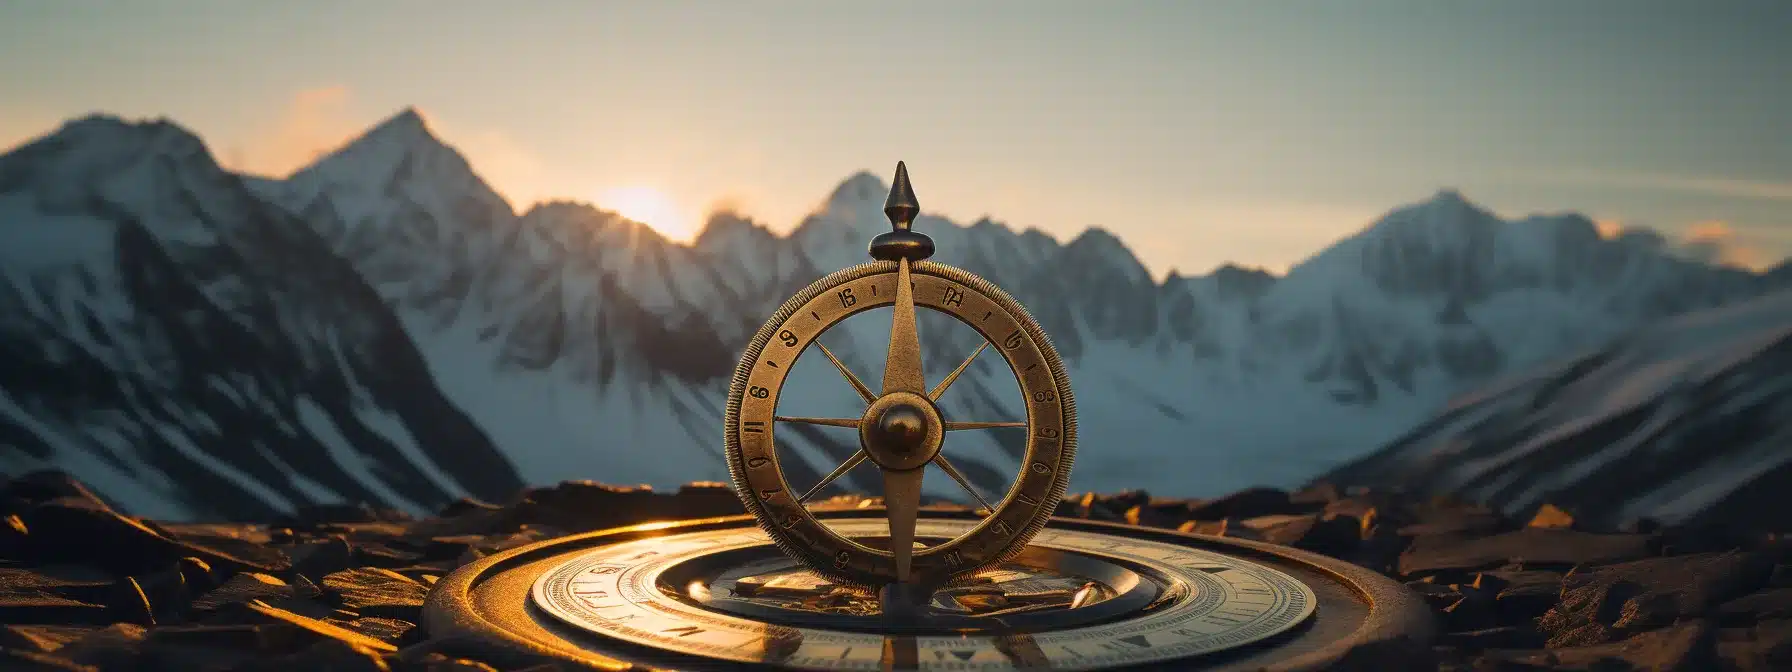 A Masterfully Carved Sculpture Of A Compass With A Flag Atop The Highest Peak, Symbolizing Brand Strategy Guiding Marketing Efforts In The Treacherous Ocean Of Competition And Market Position.